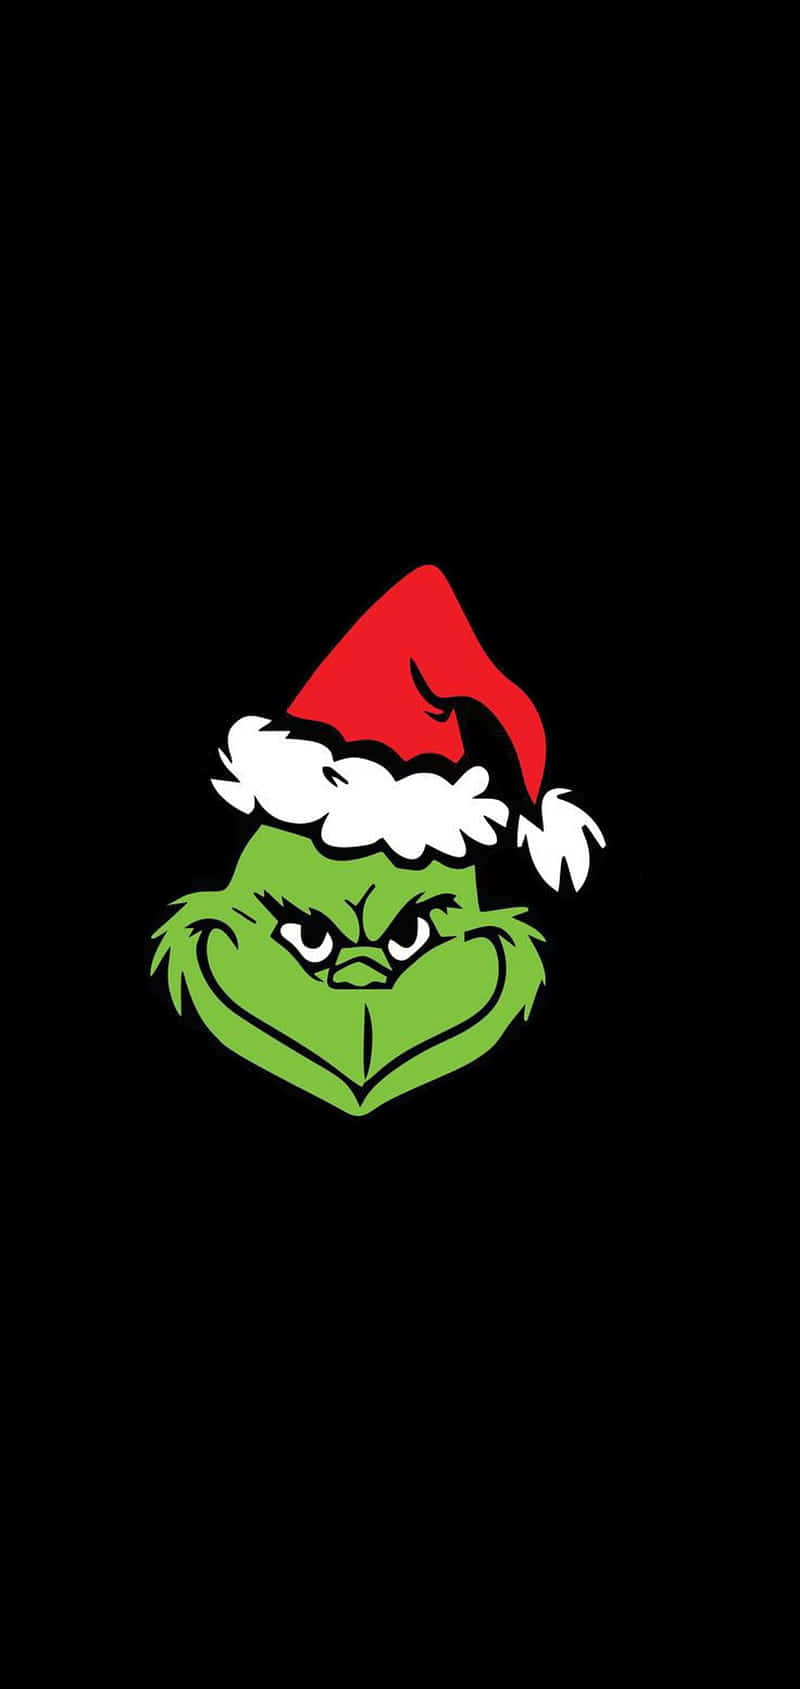 "The Grinch Brings All The Holiday Cheer"